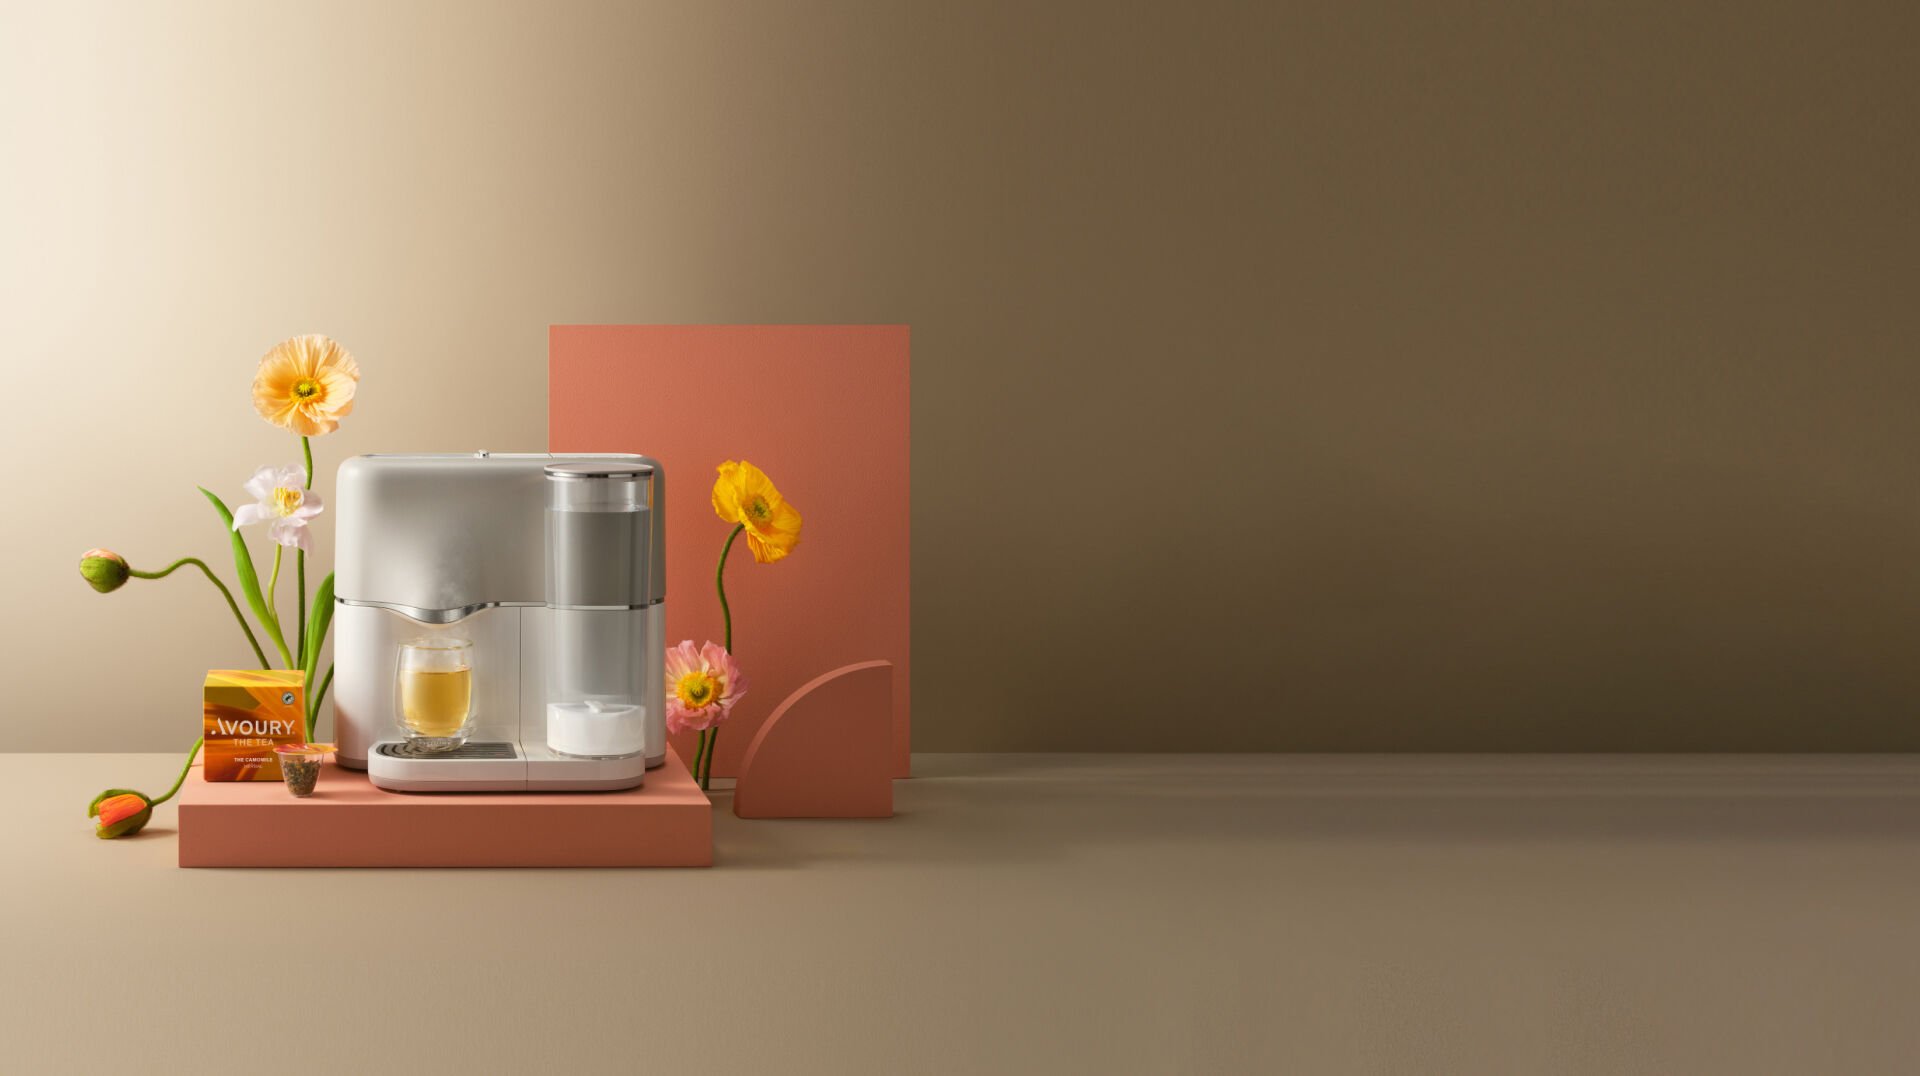 Avoury One tea machine in silver white with a cup of organic tea